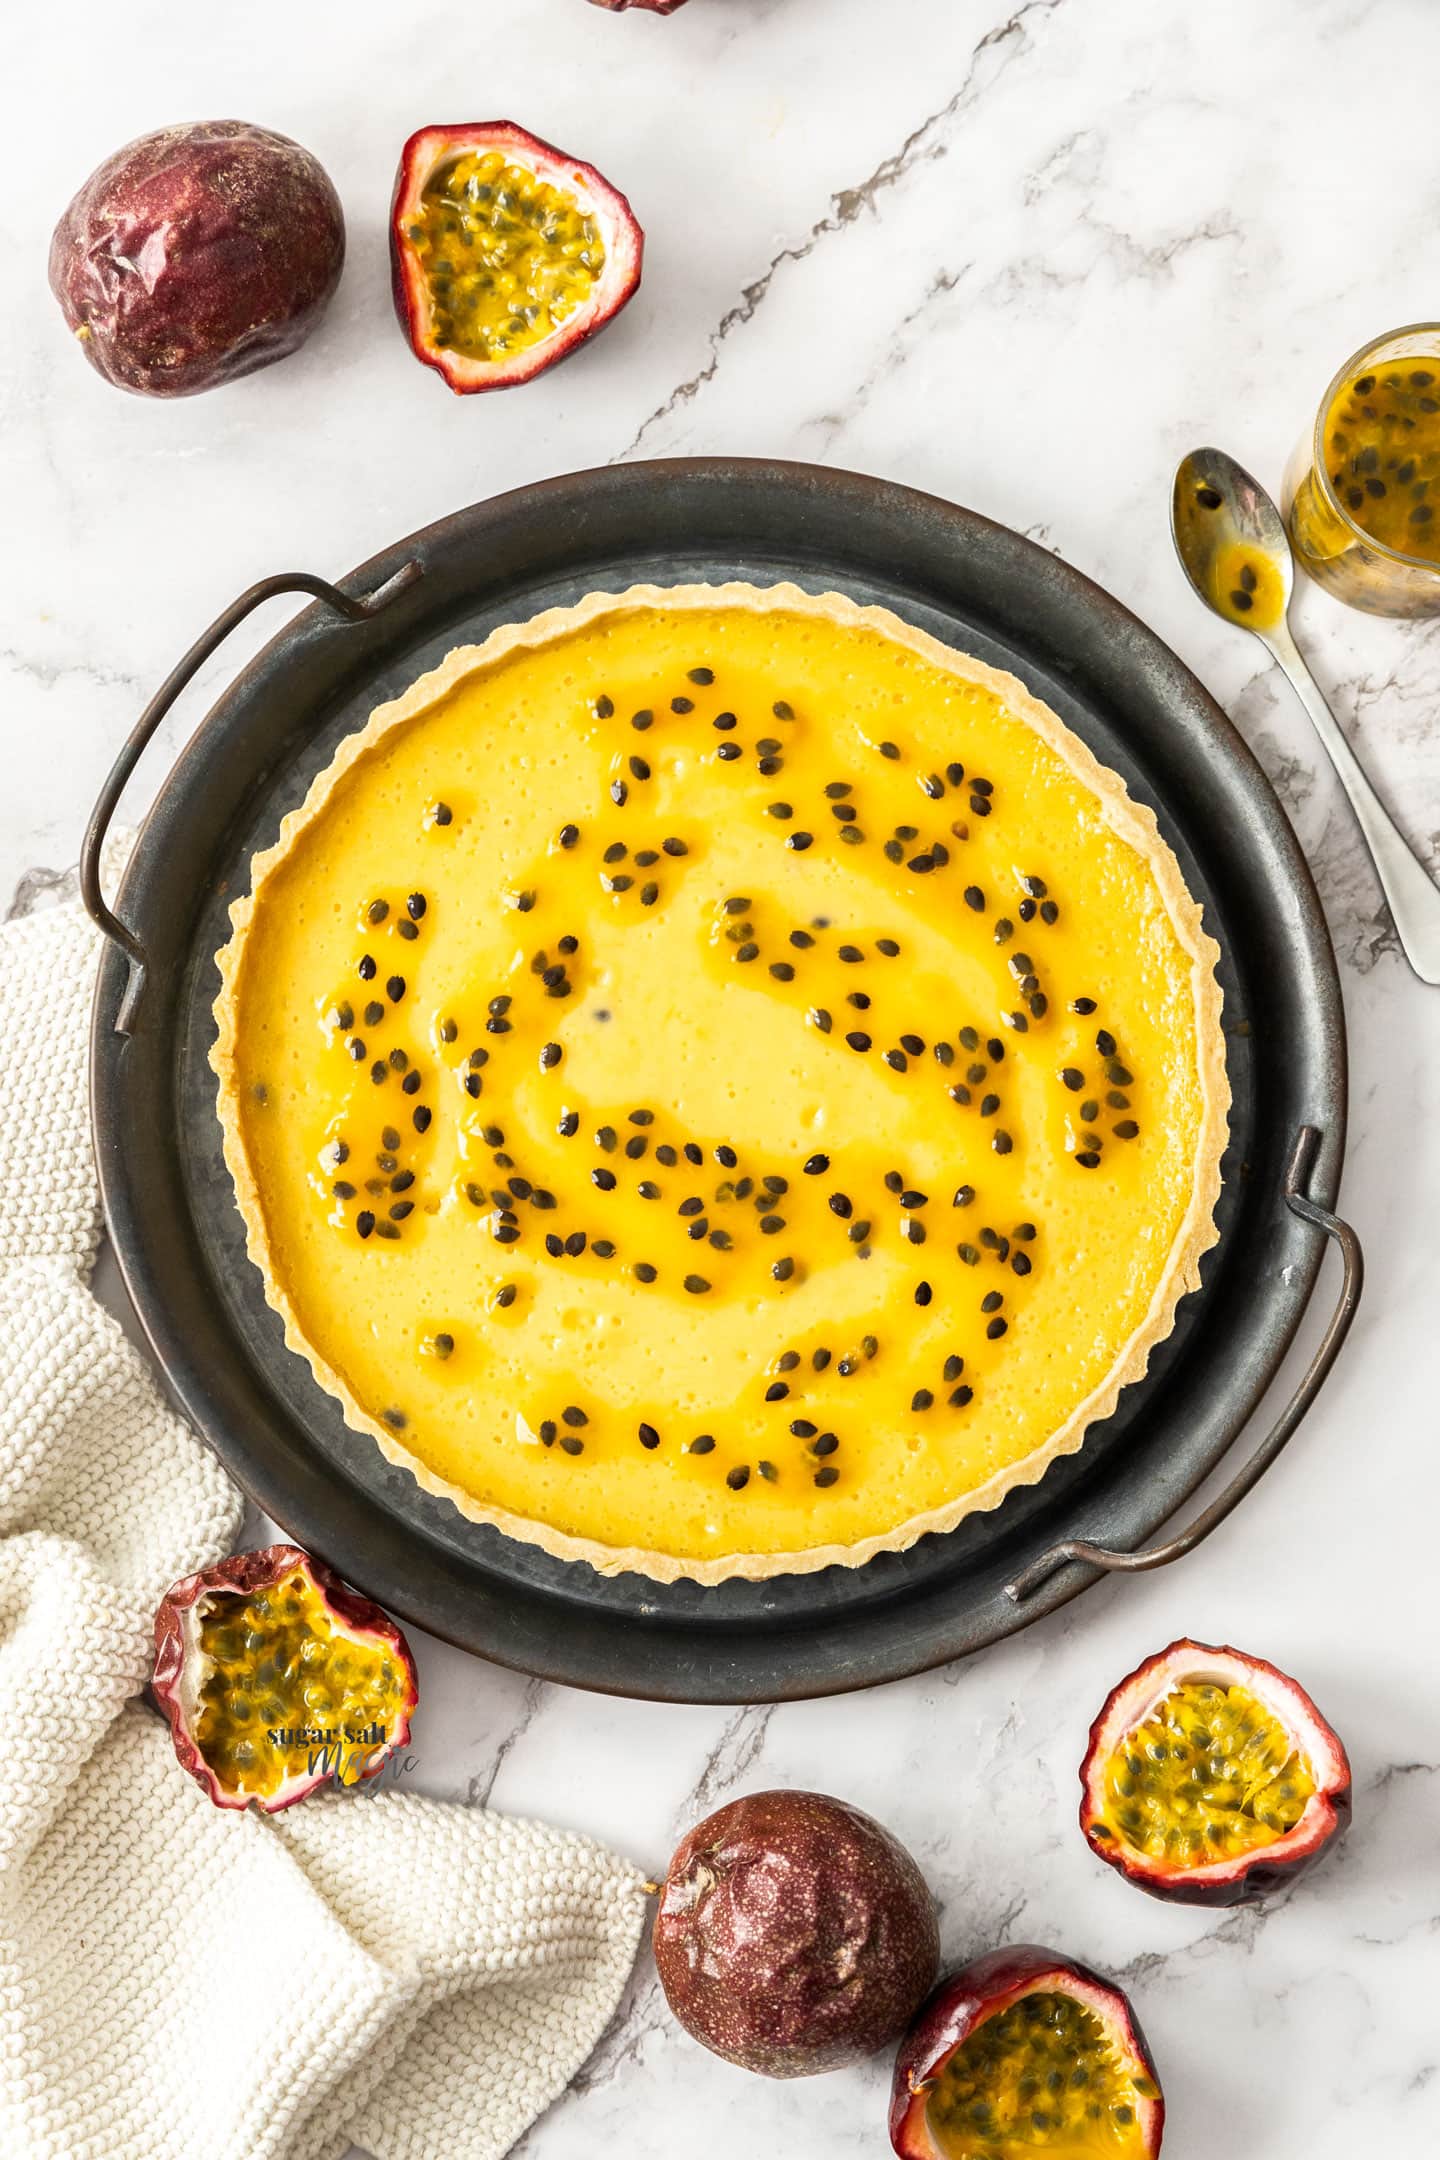 Top down view of a passionfruit filled tart on a metal tray.